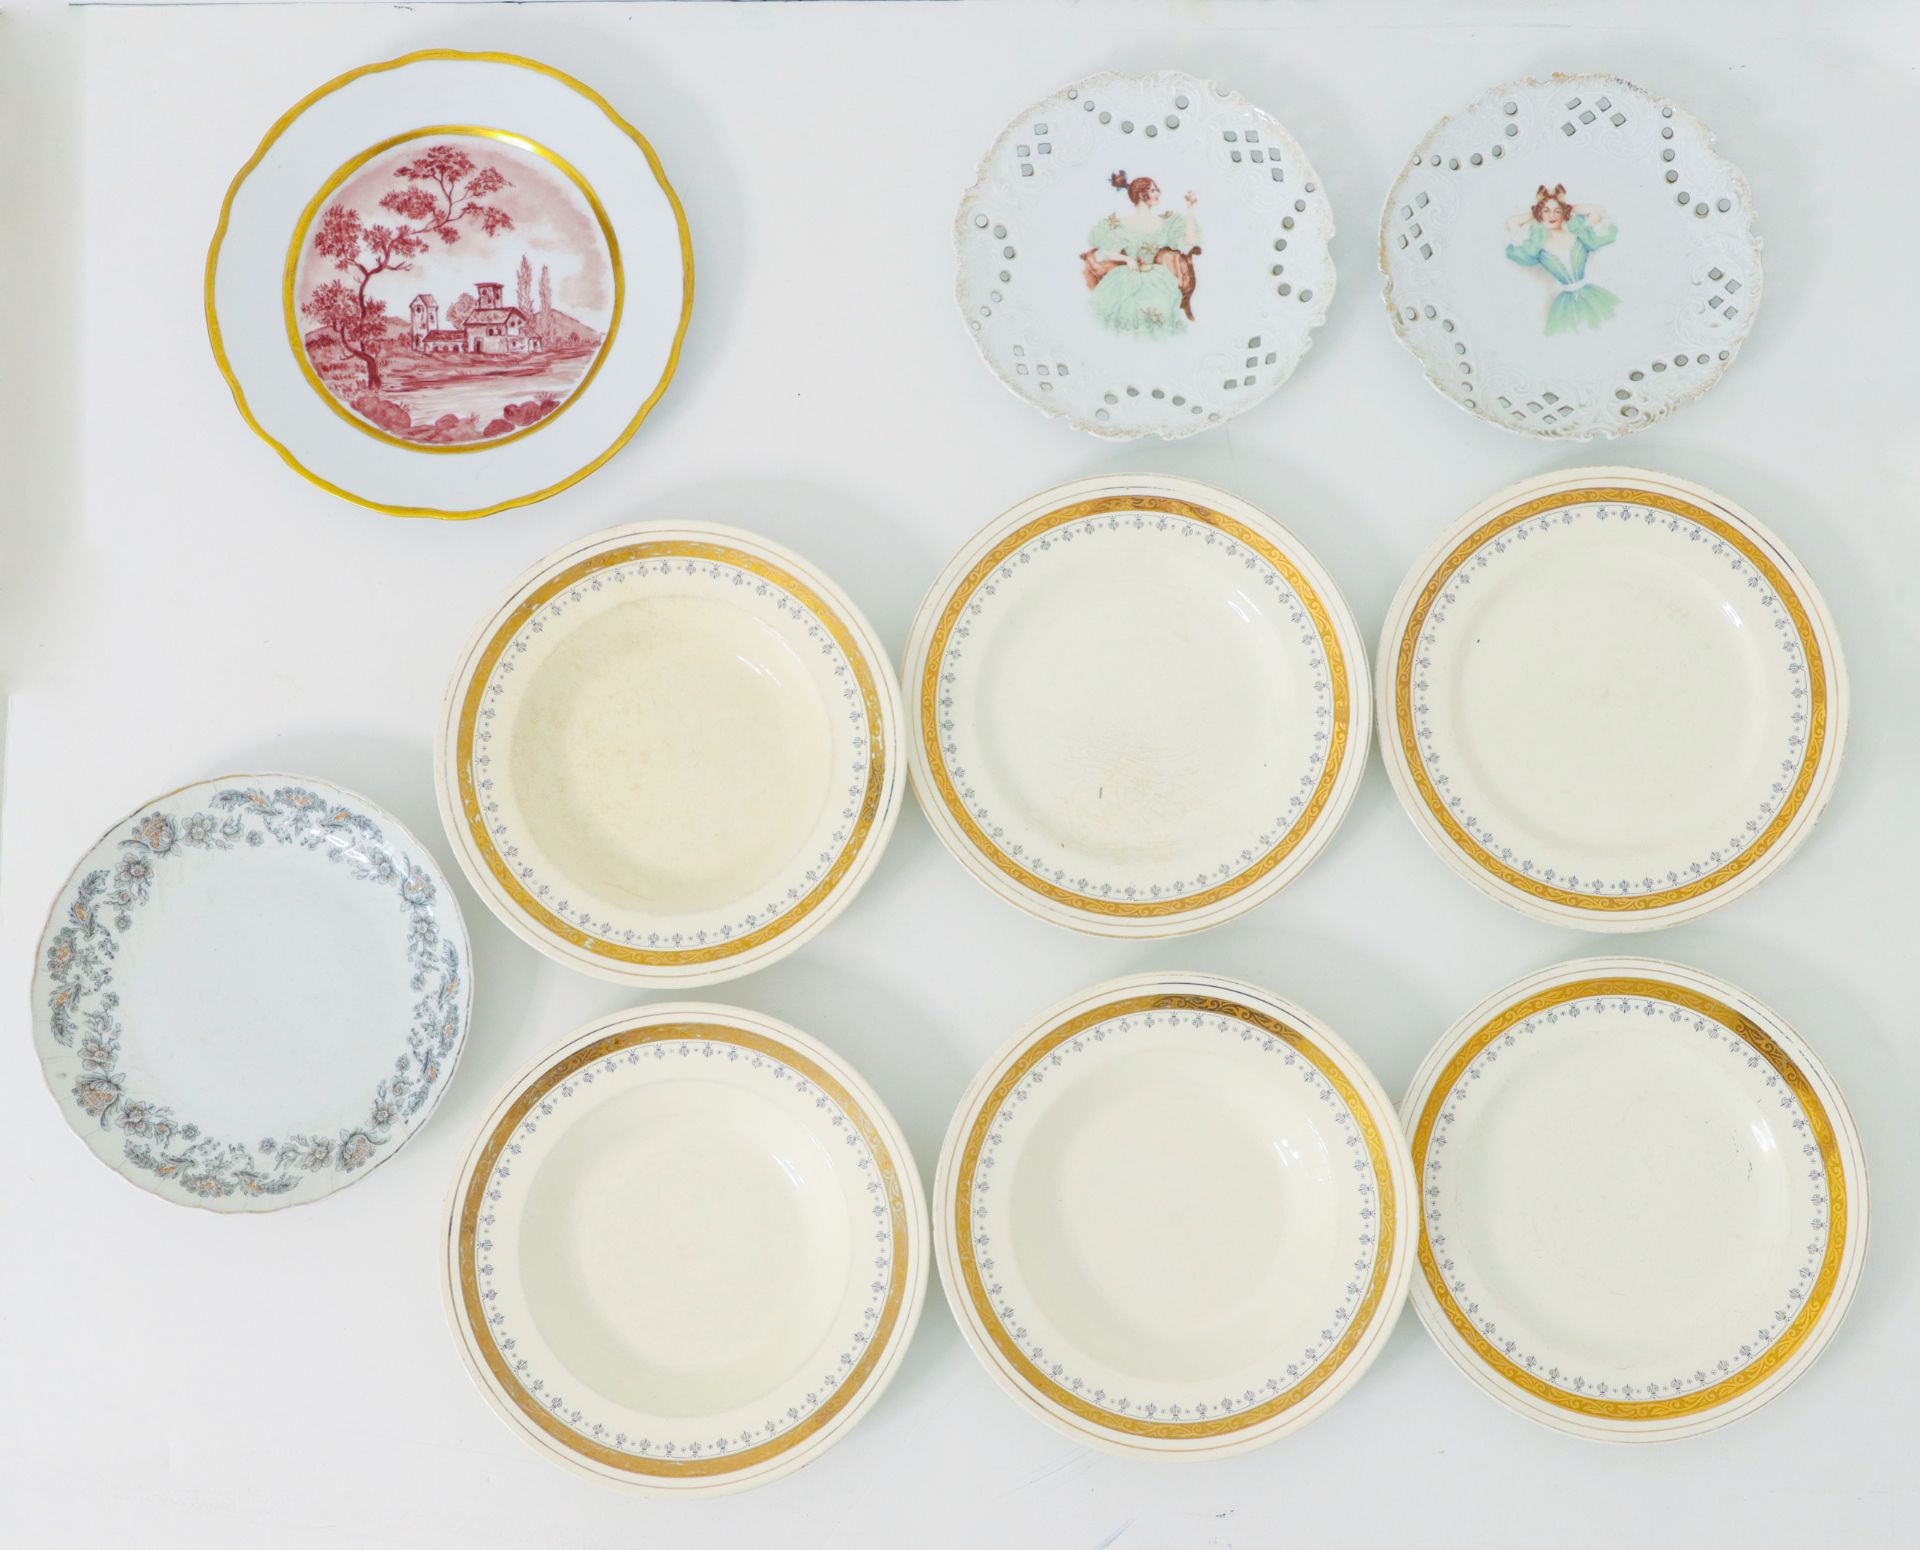 Lot of 10 plates - Brocante